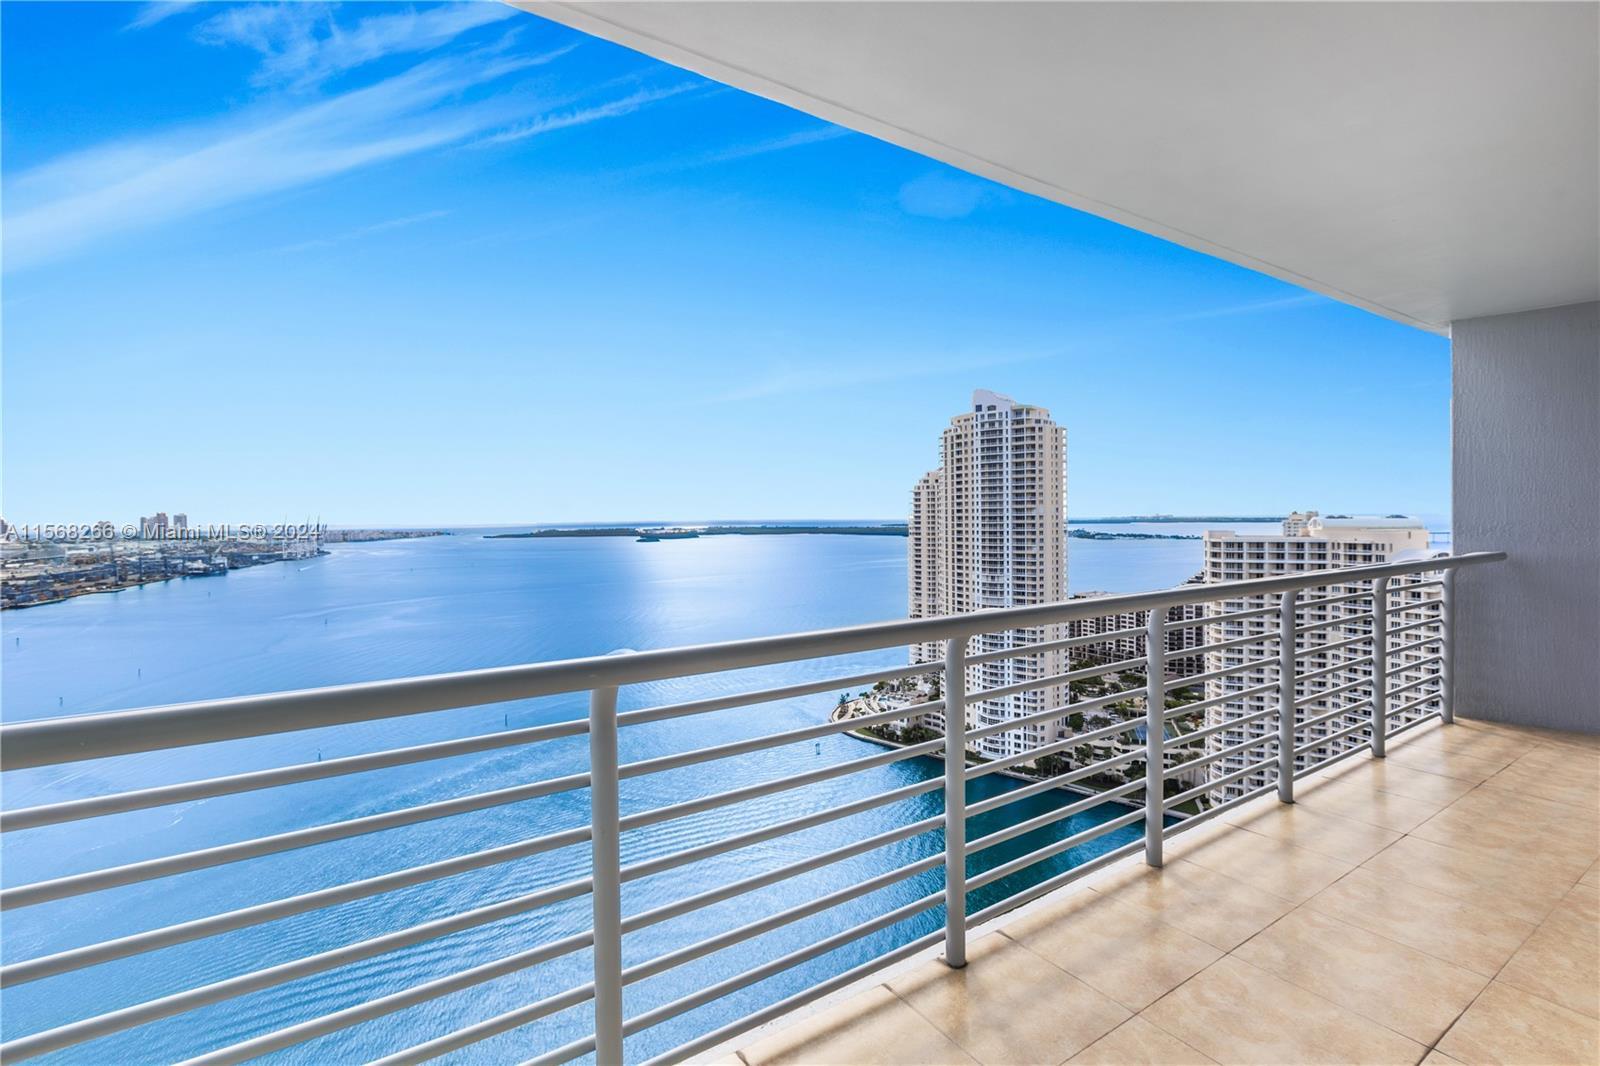 Beautiful 3bdrms 2bths fully furnished condo with direct views of Biscayne Bay. Unit has Italian kit